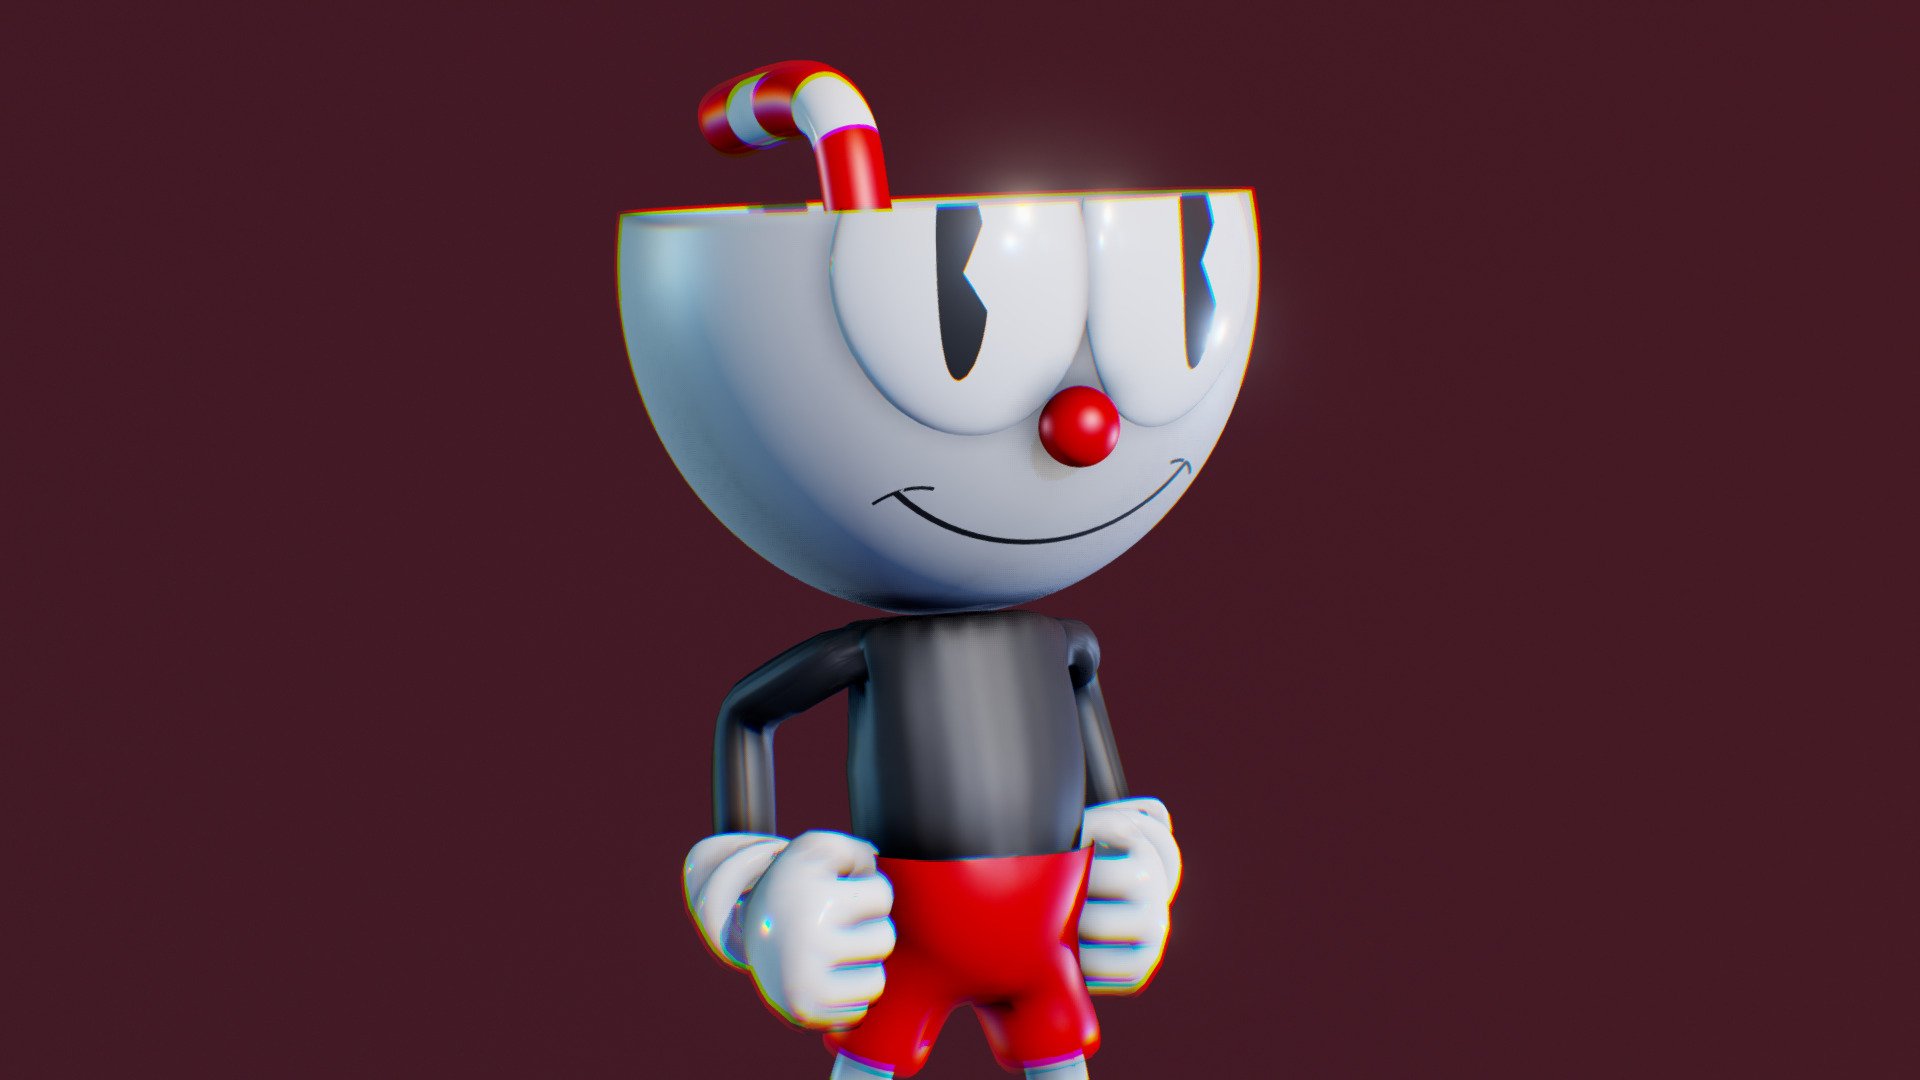 ive wondered how a statue of cuphead in the style of the Frist 4 Figures may look like. and this is the result of it 

hope you enjoy it - Cuphead Statue - 3D model by WinderBlitz 3d model